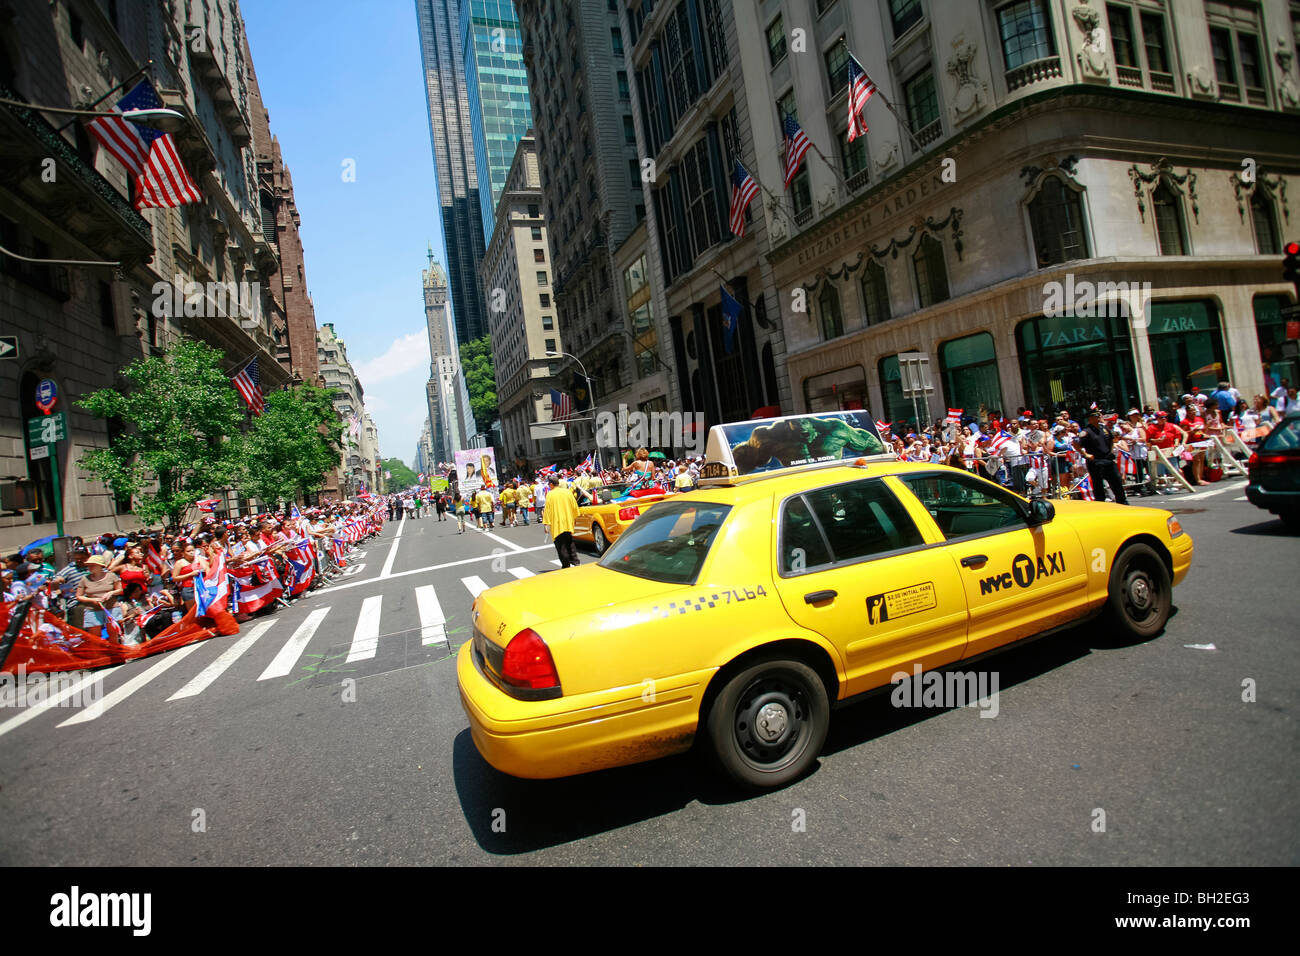 New York City taxicab during Midtown rush hour in Manhattan. Stock Photo